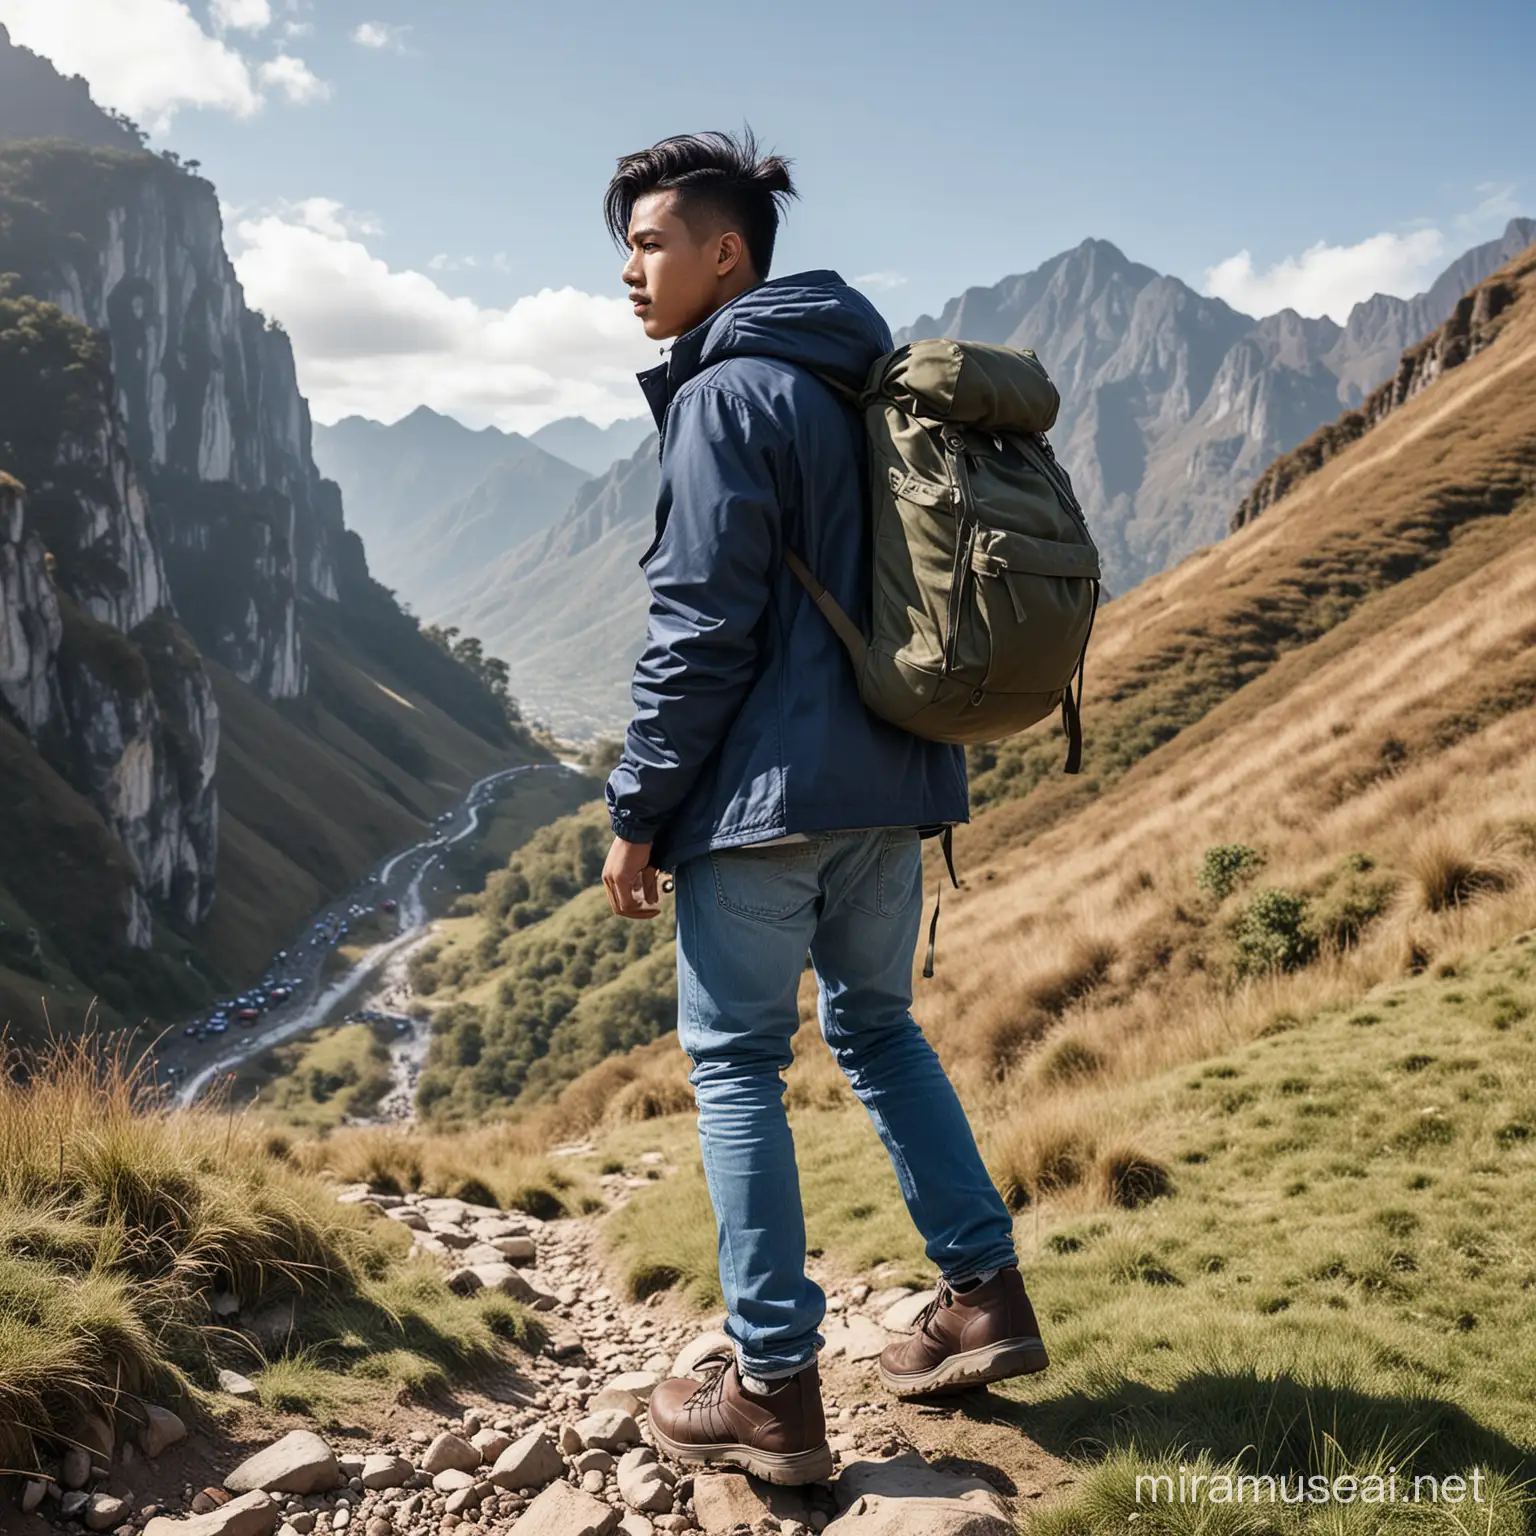 Young Indonesian Man Descending Steep Terrain with Backpack in Mountainous Landscape